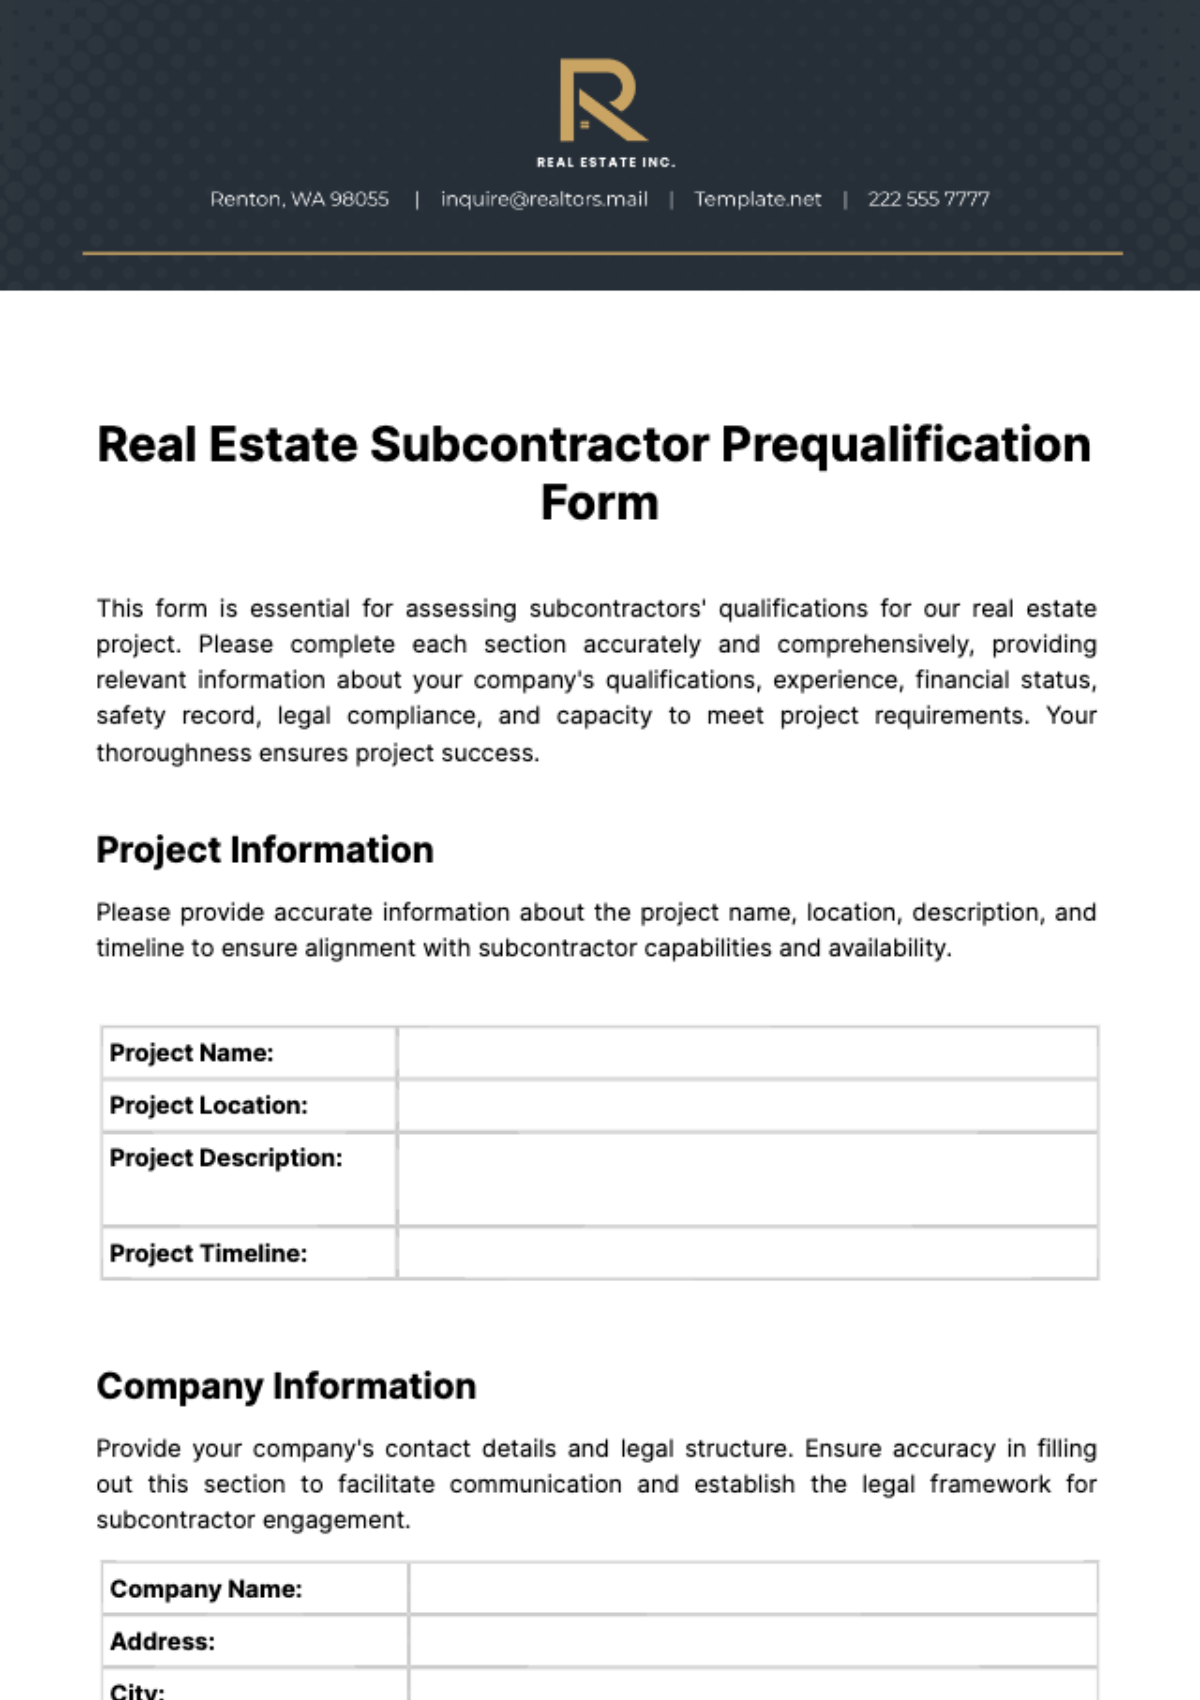 Free Real Estate Subcontractor Prequalification Form Template